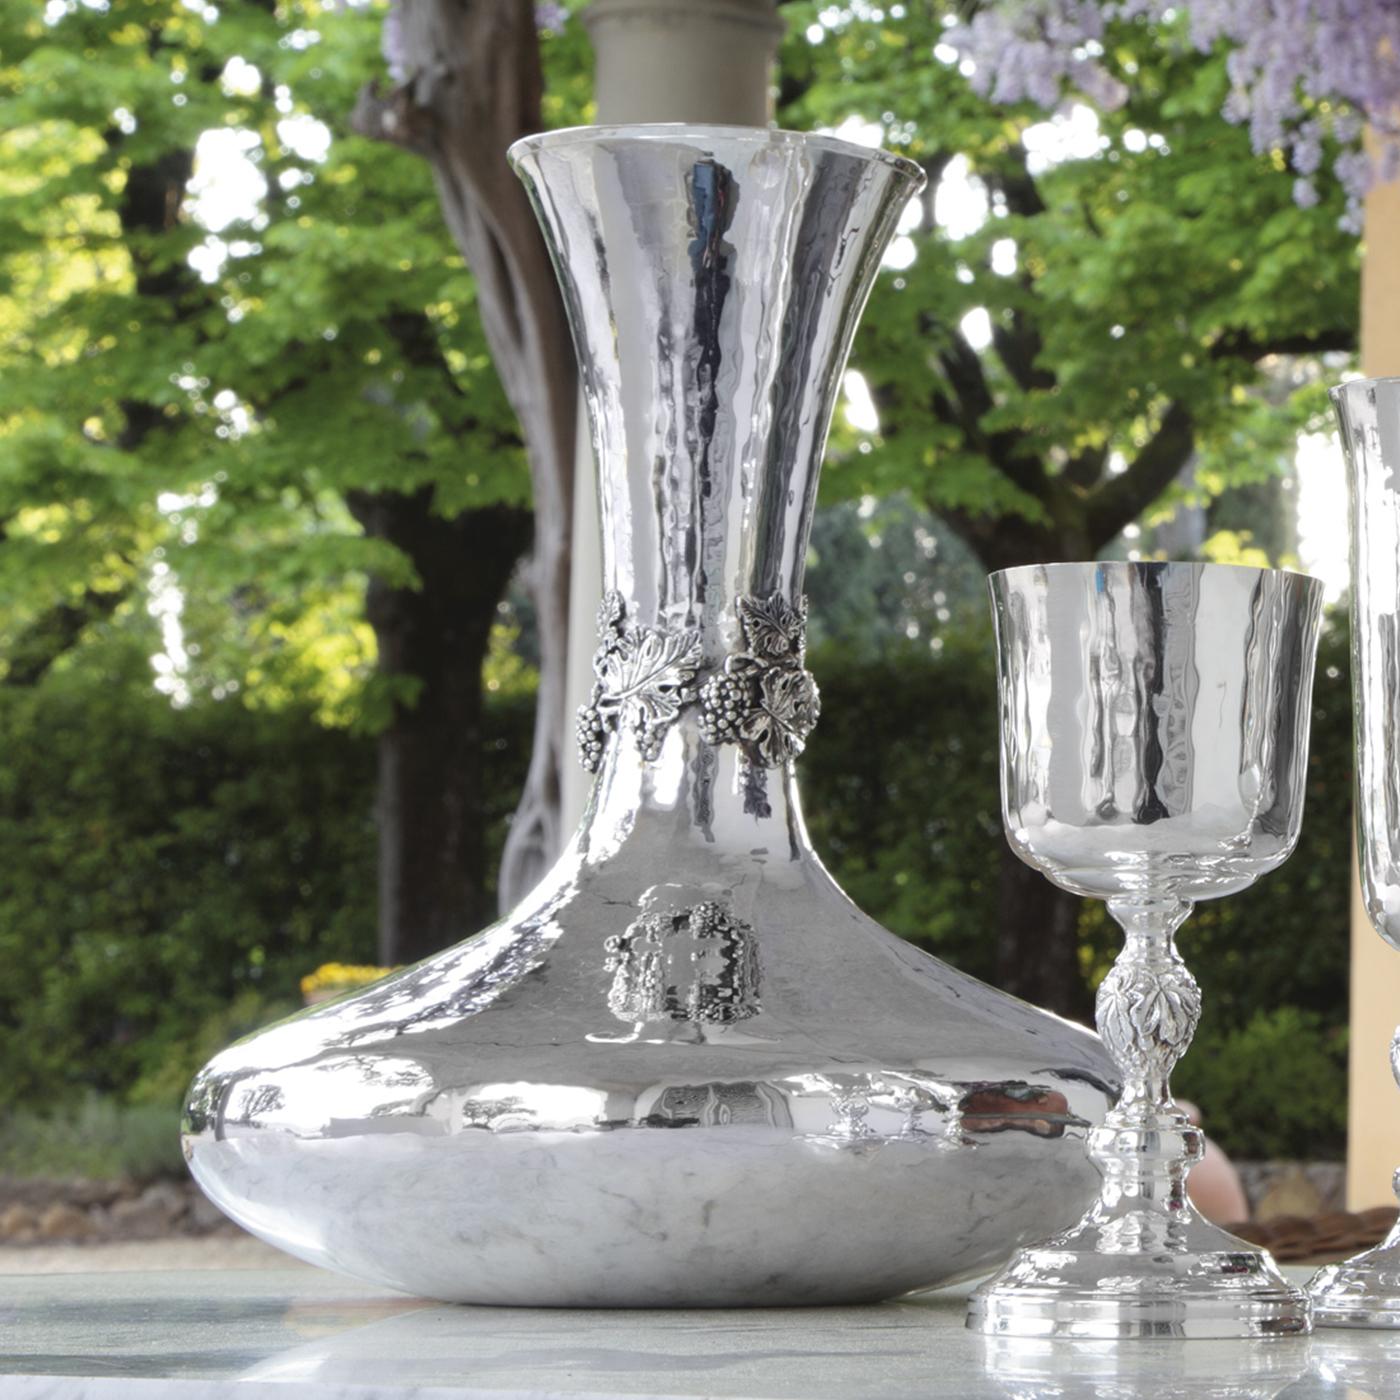 This elegant goblet brings sophistication to the table, while elevating the aromas and flavors of the drink. Made from silver, it will not alter the quality or taste of the beverage. Moreover, this material is perfect for tableware due to its